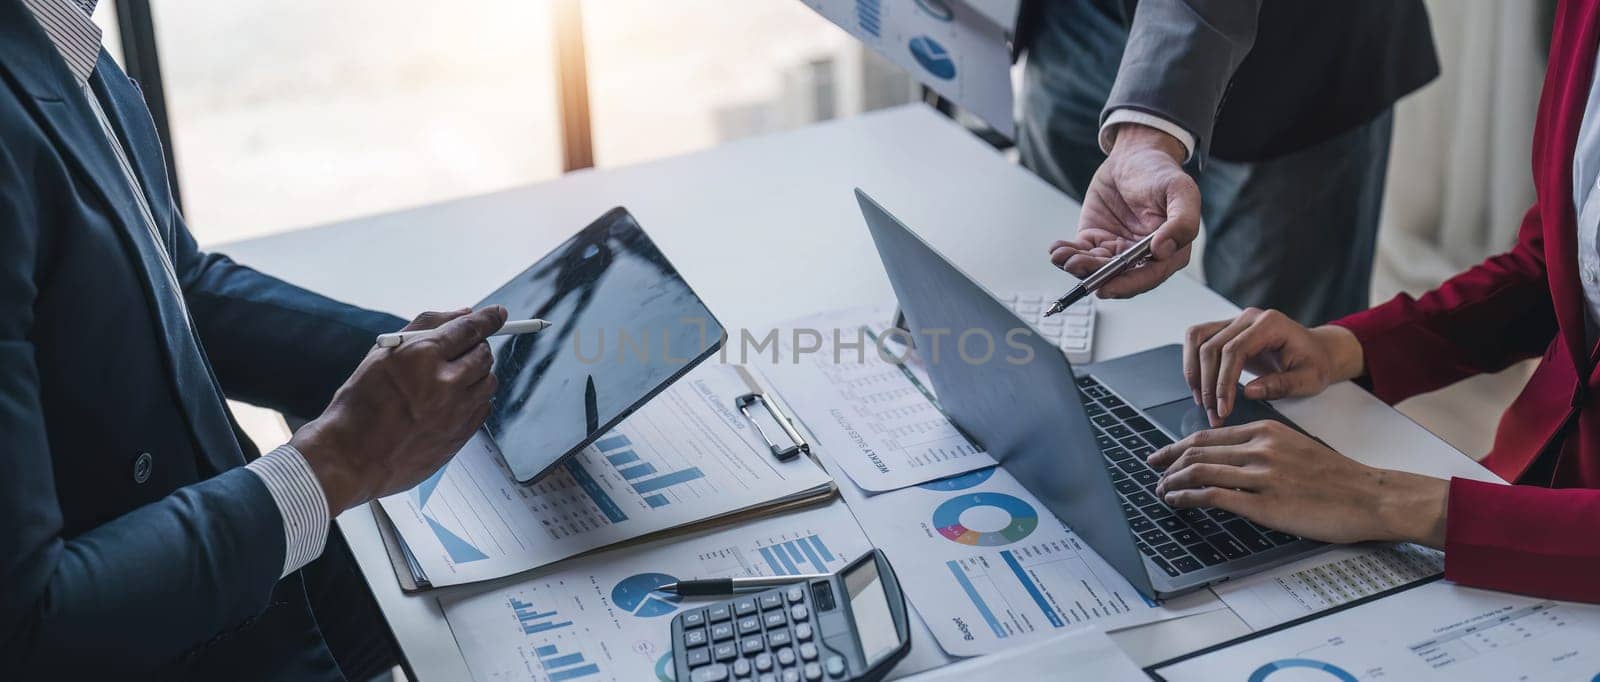 Business People Meeting using laptop computer,calculator,notebook,stock market chart paper for analysis Plans to improve quality next month. Conference Discussion Corporate Concept.